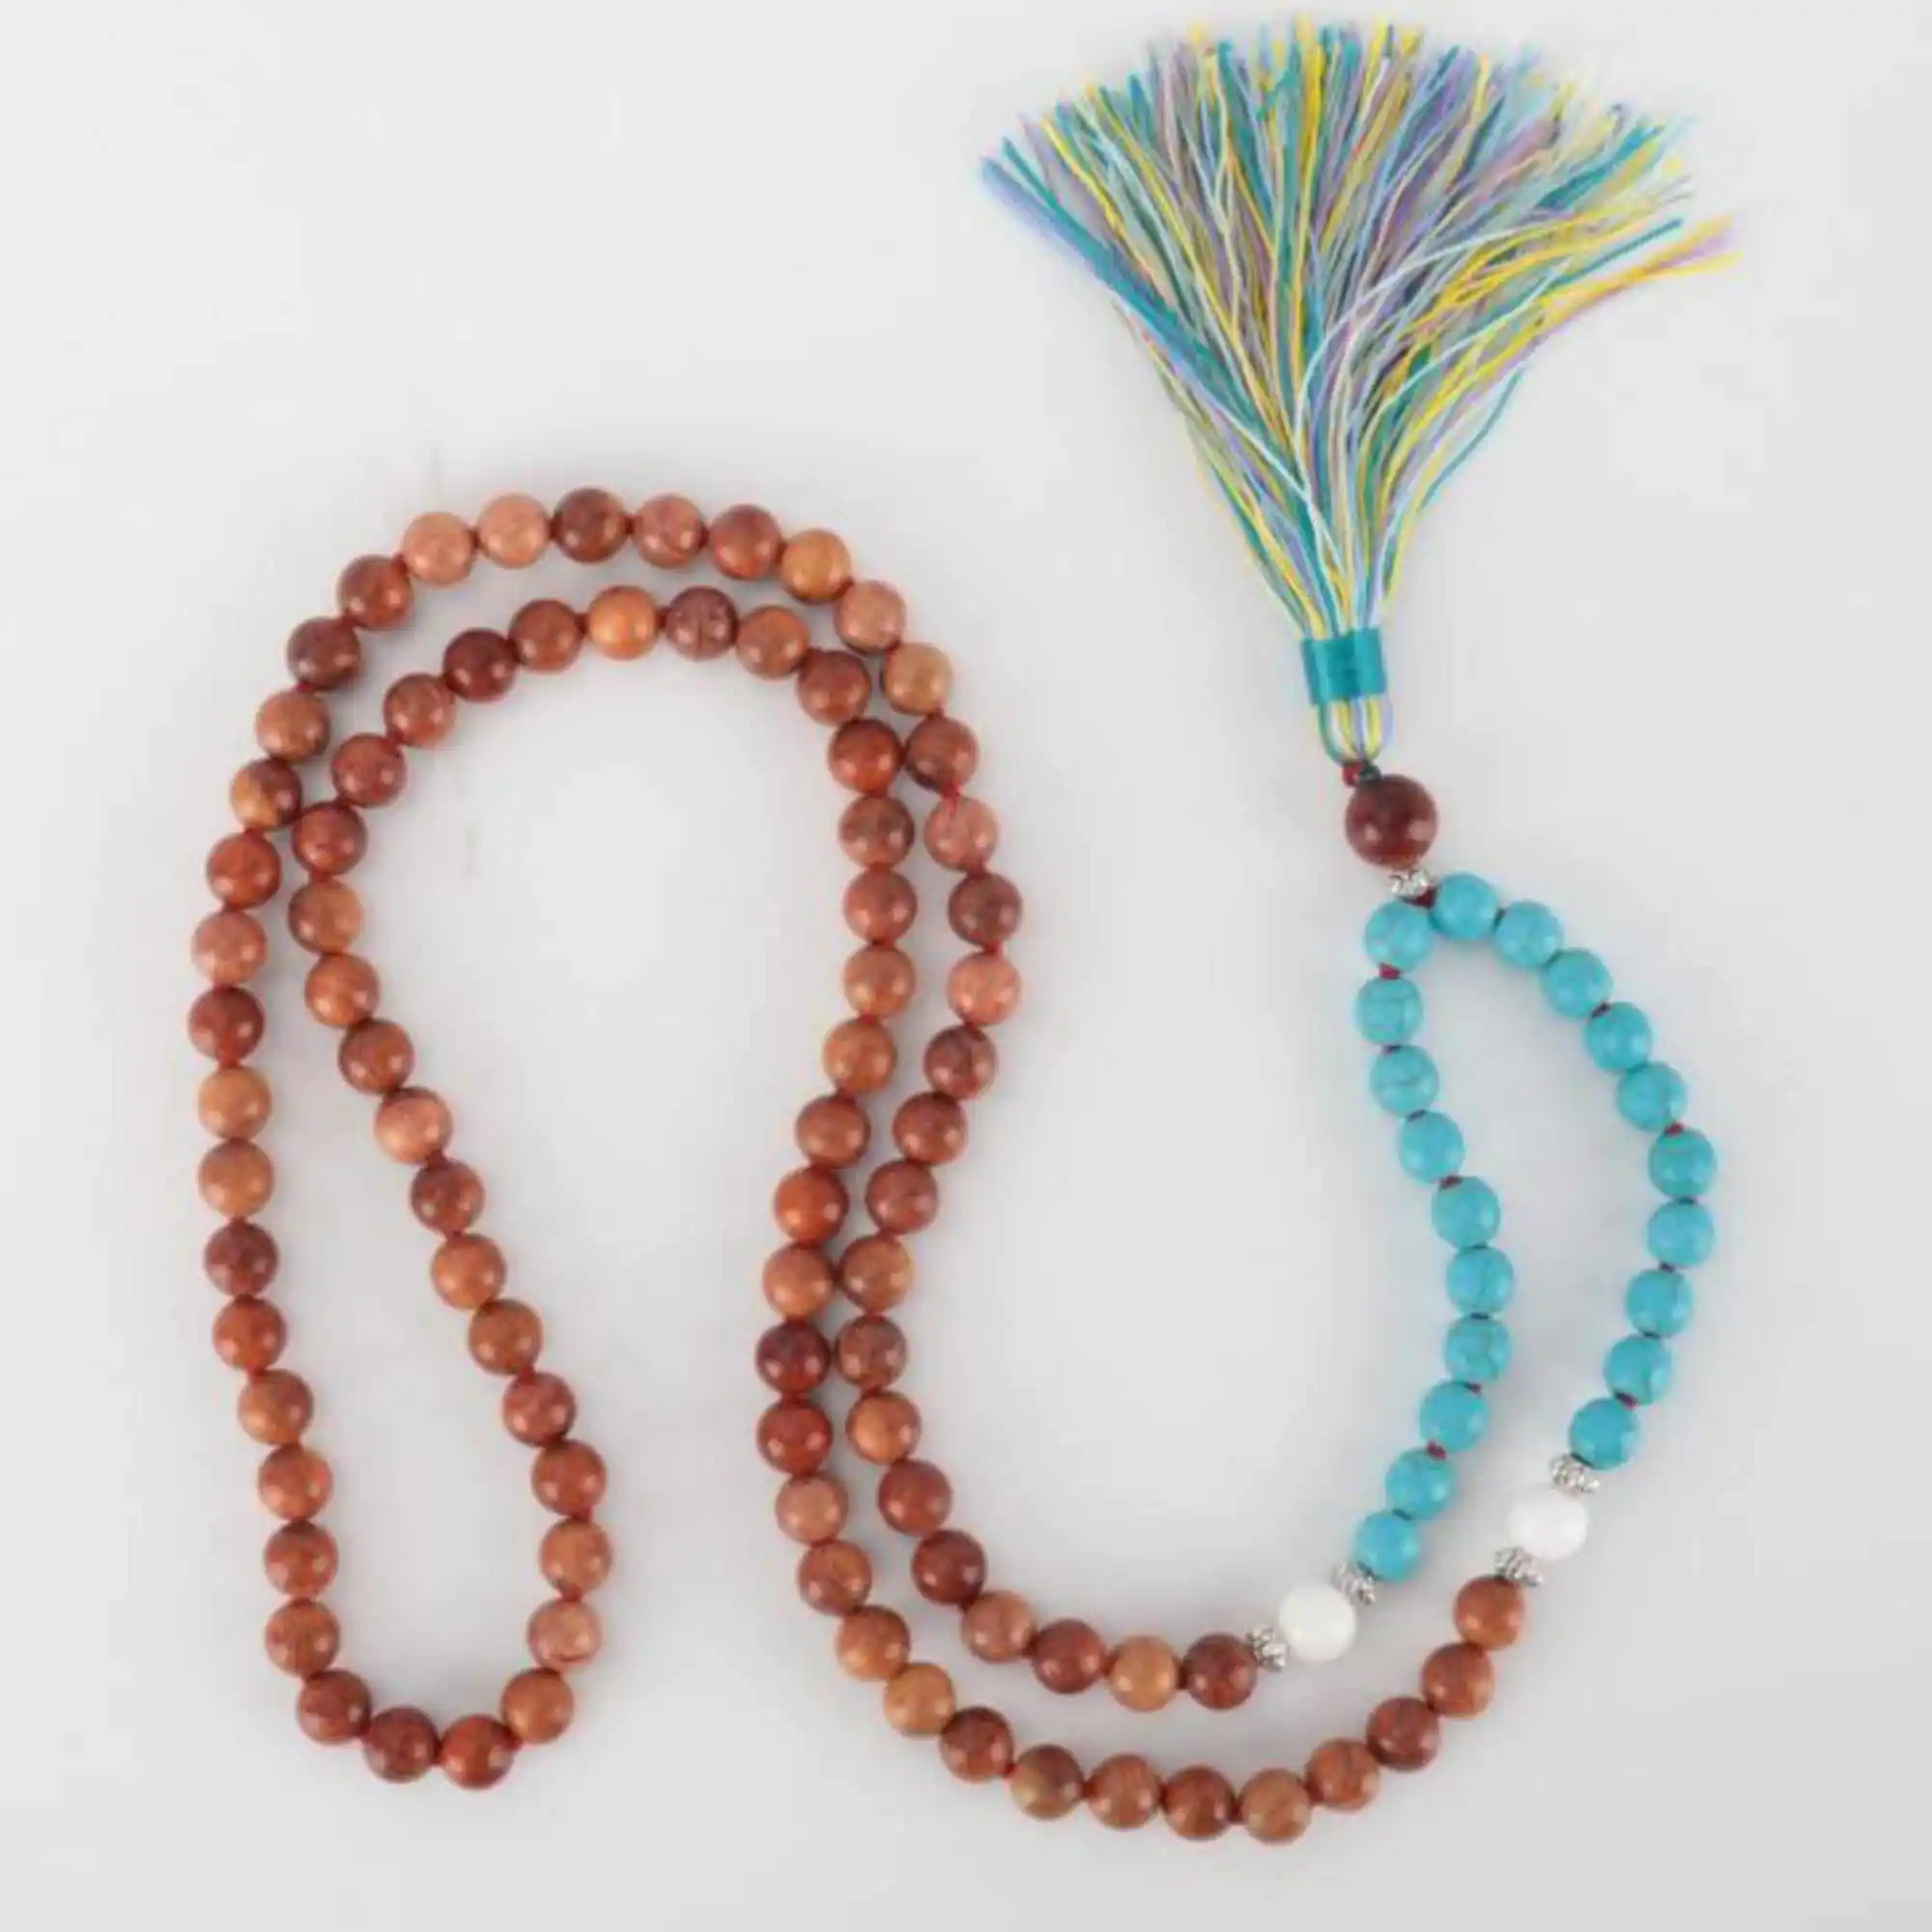 

8mm 108 Natural Sandalwood blue Turquoise Bead knot Necklace All Saints' Day Chain Calming Bohemia Beaded Meditation Inspiration